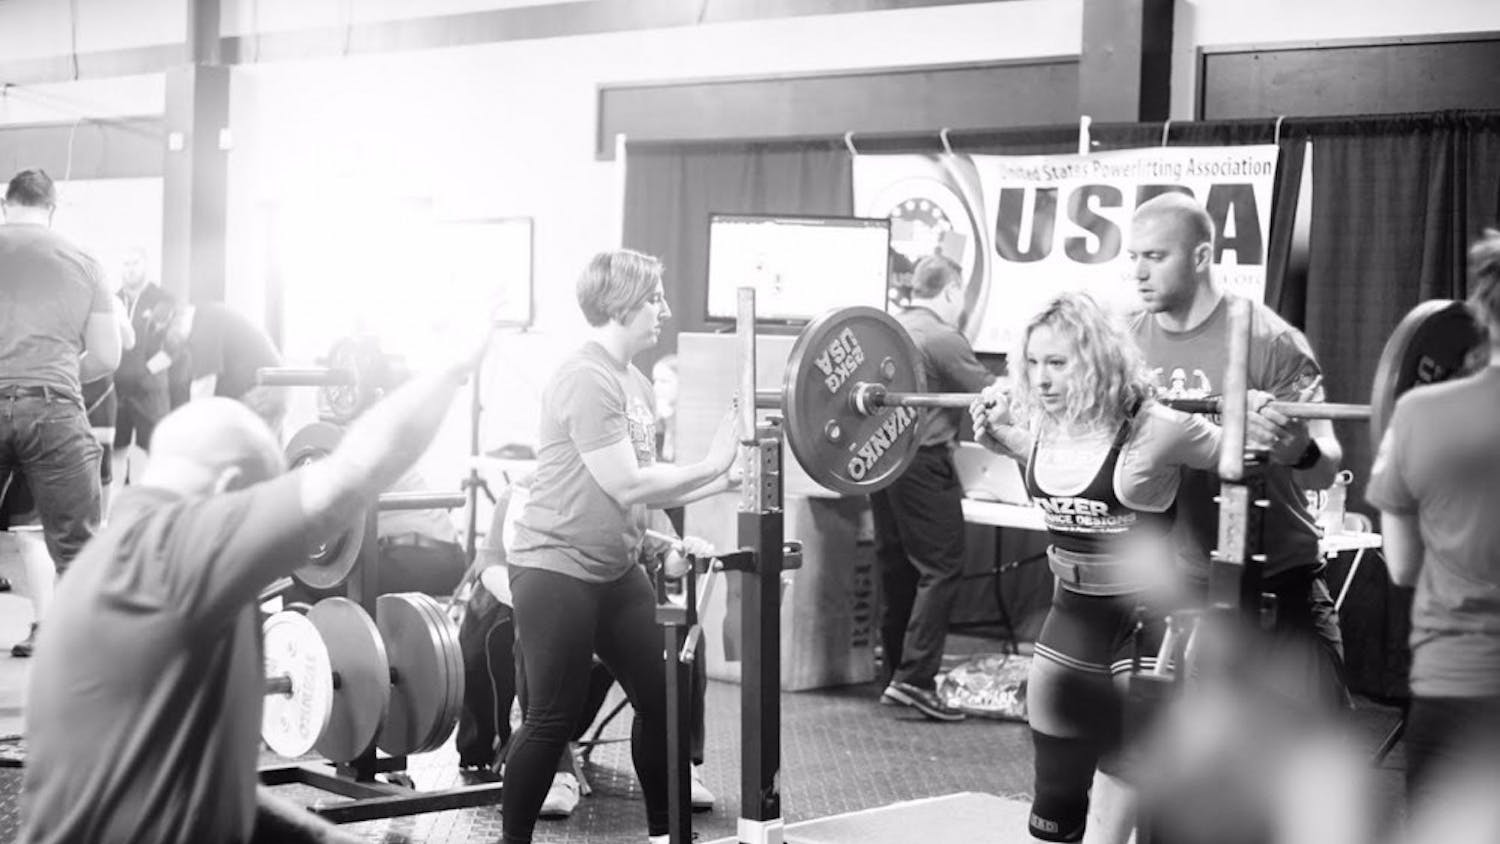 Junior economics major April Purvis spends her free time training and weightlifting as a body builder. Photo courtesy of April Purvis.&nbsp;